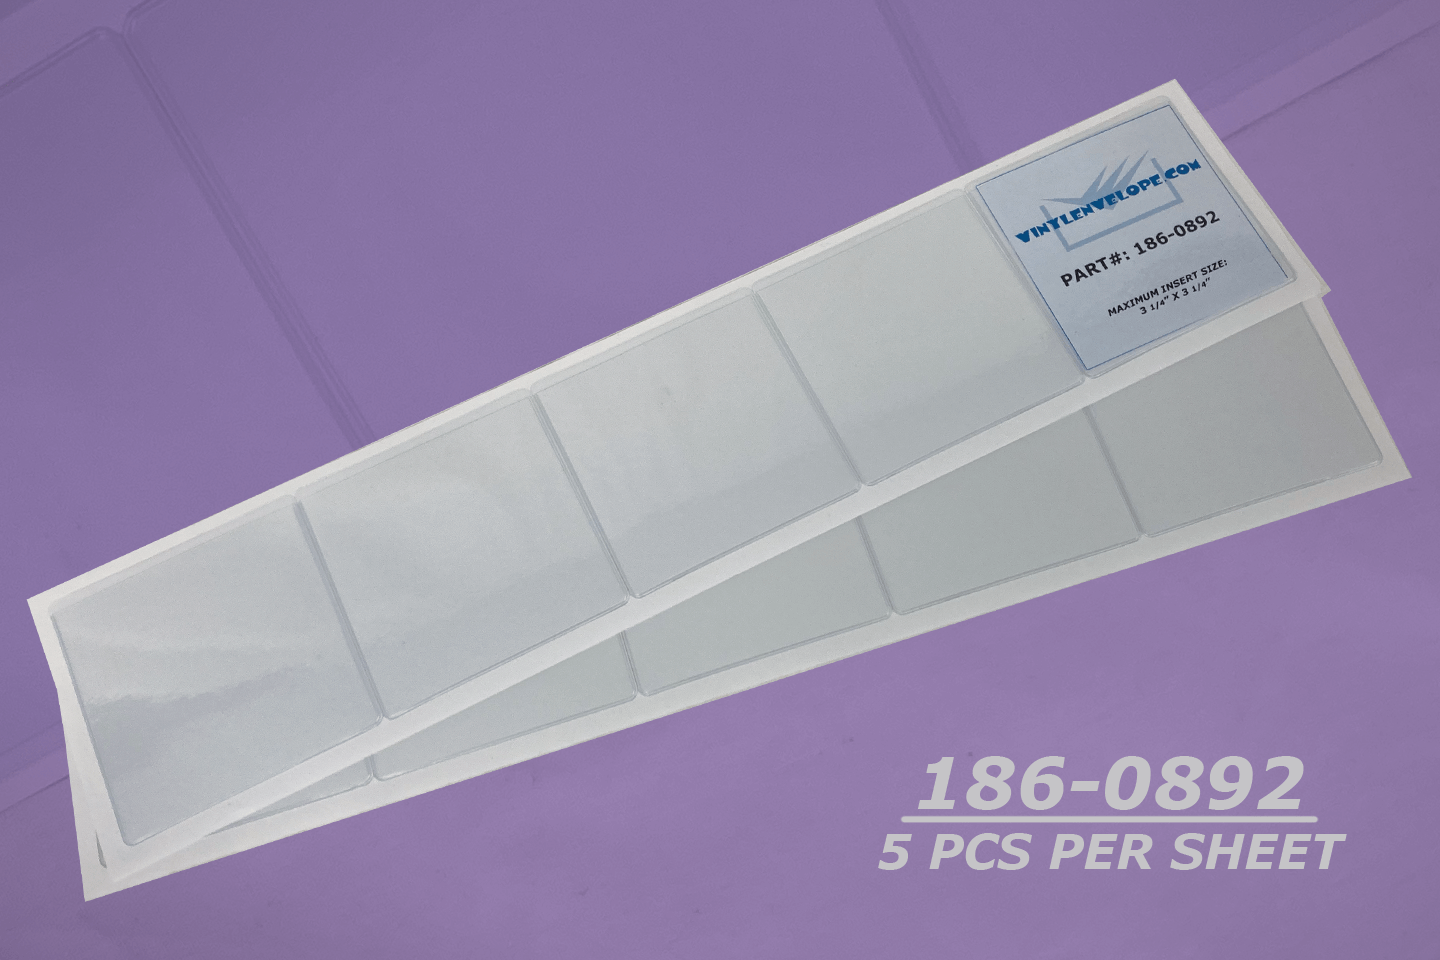 3 1/2" X 3 1/2" Adhesive Pouch